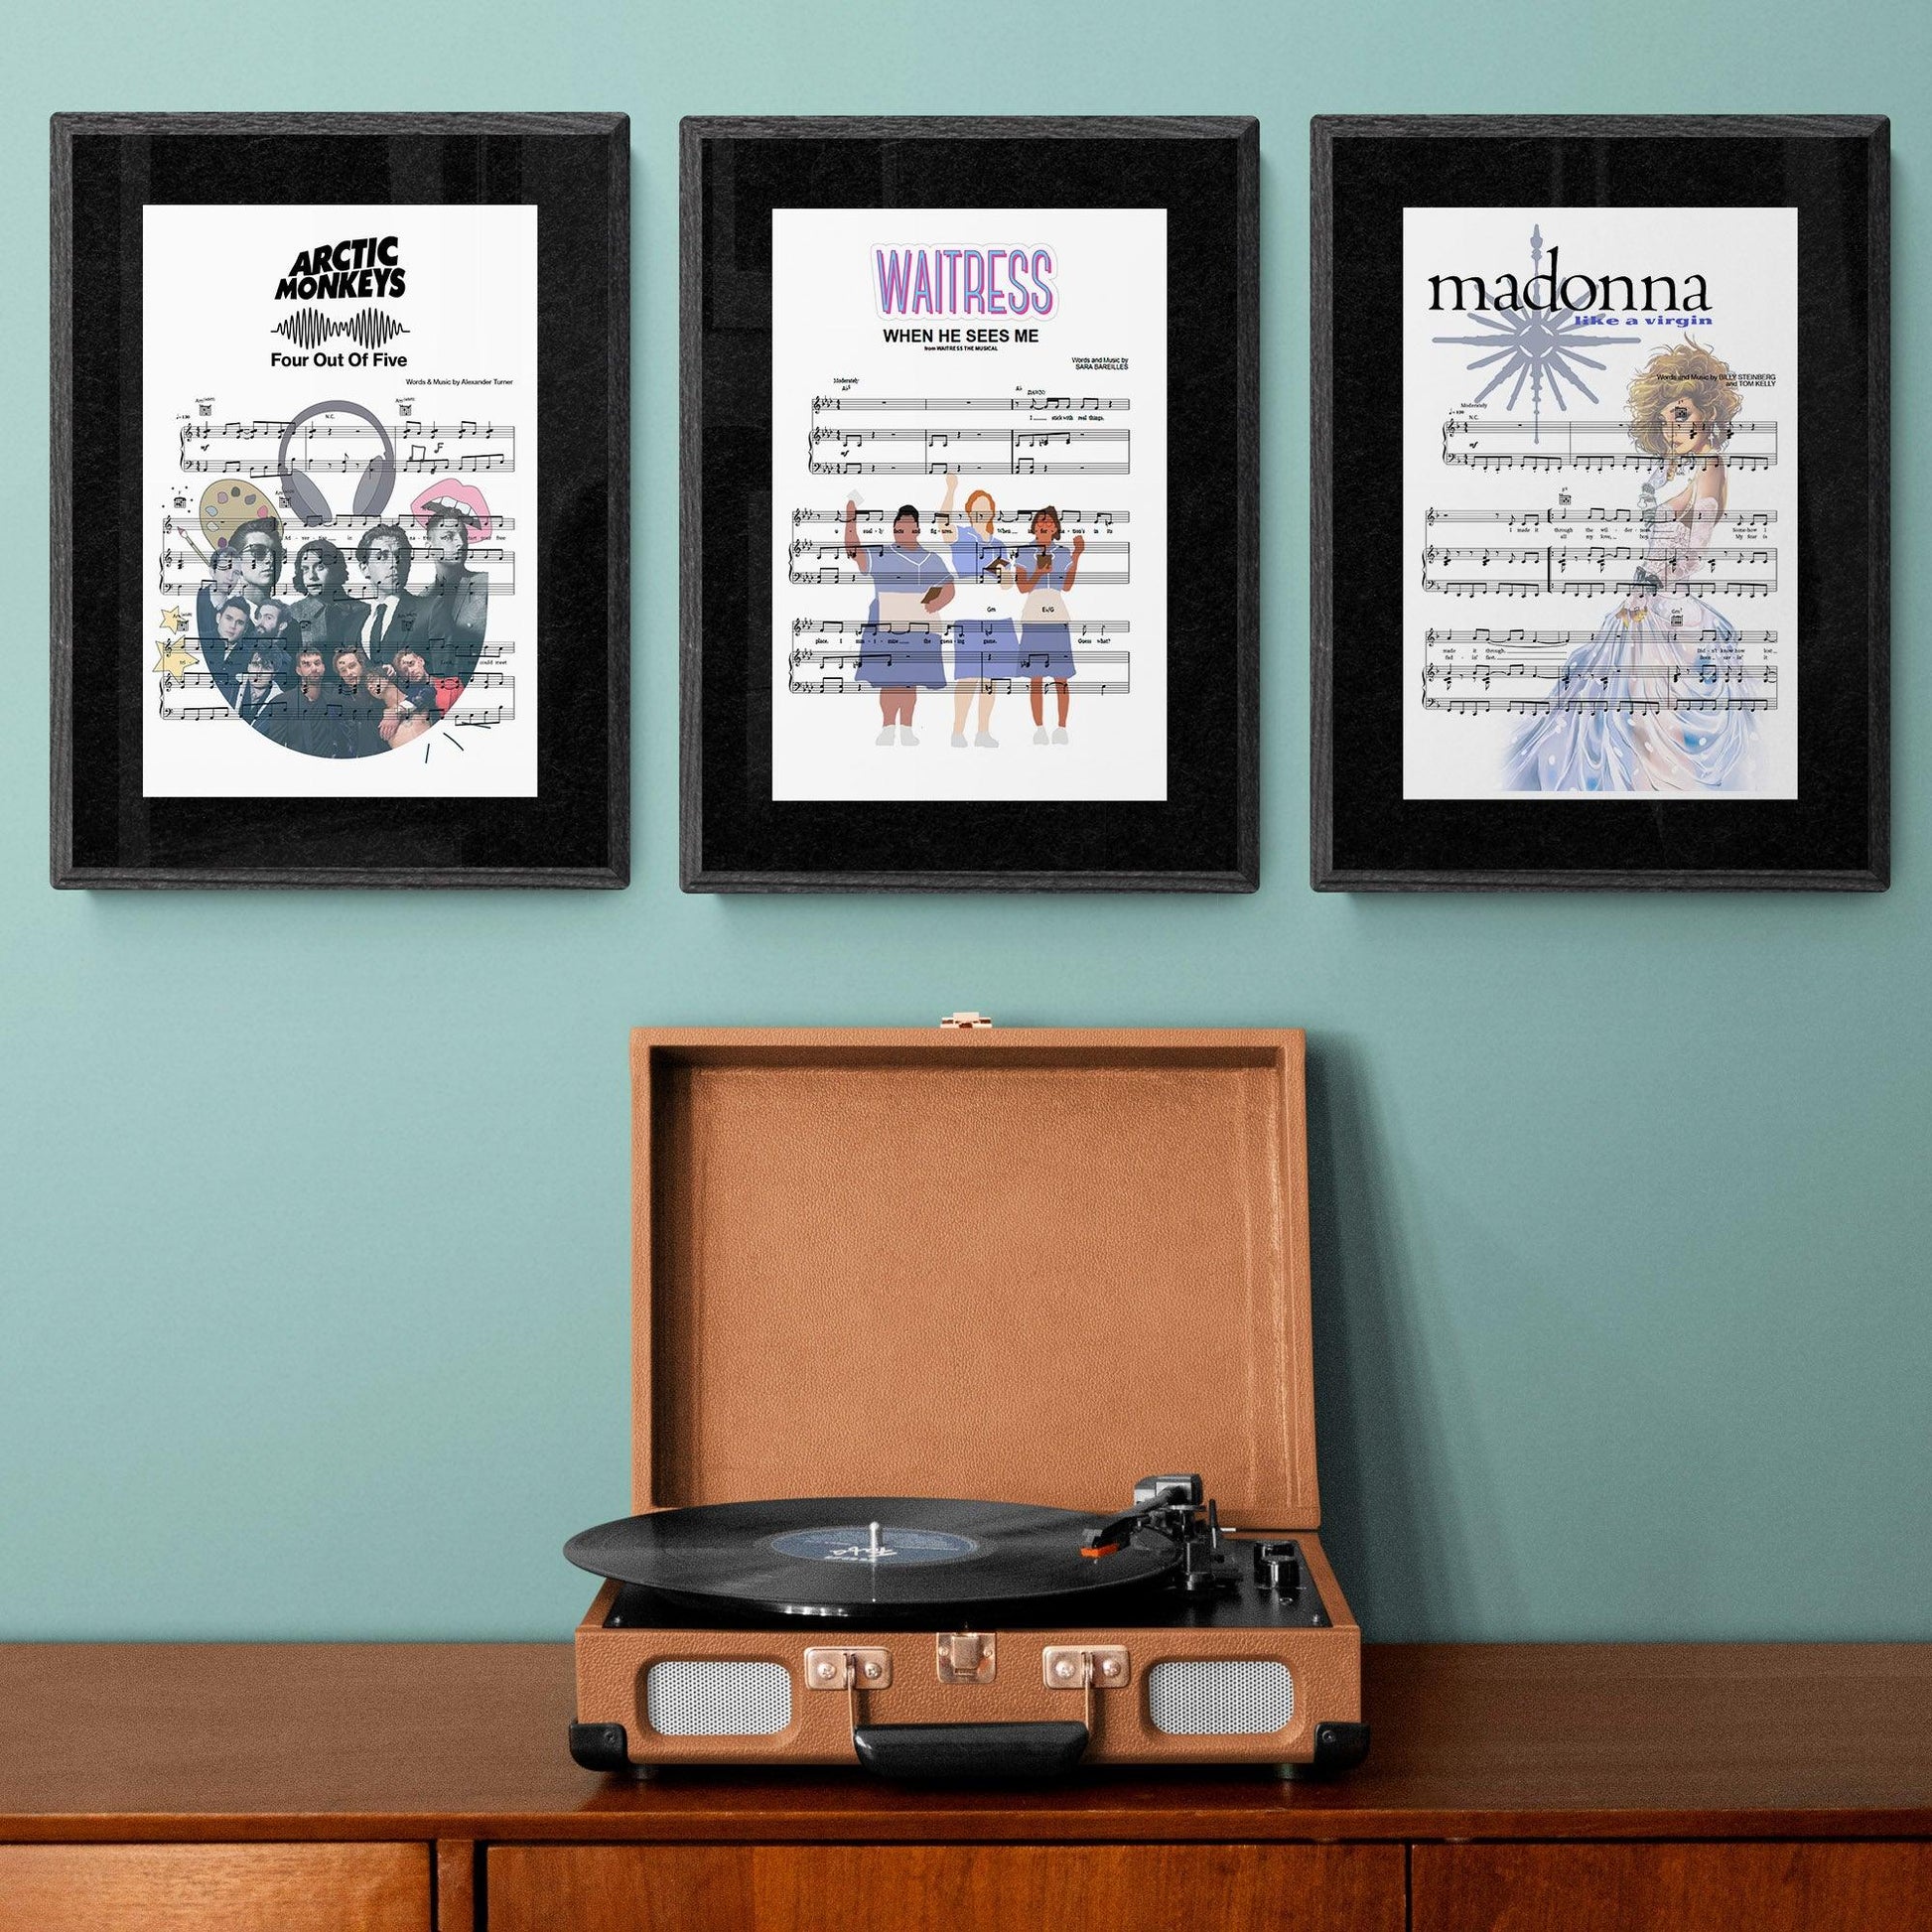 Waitress - When He Sees Me Print | Song Music Sheet Notes Print Everyone has a favorite song especially Waitress Music Print, and now you can show the score as printed staff. The personal favorite song sheet print shows the song chosen as the score. 